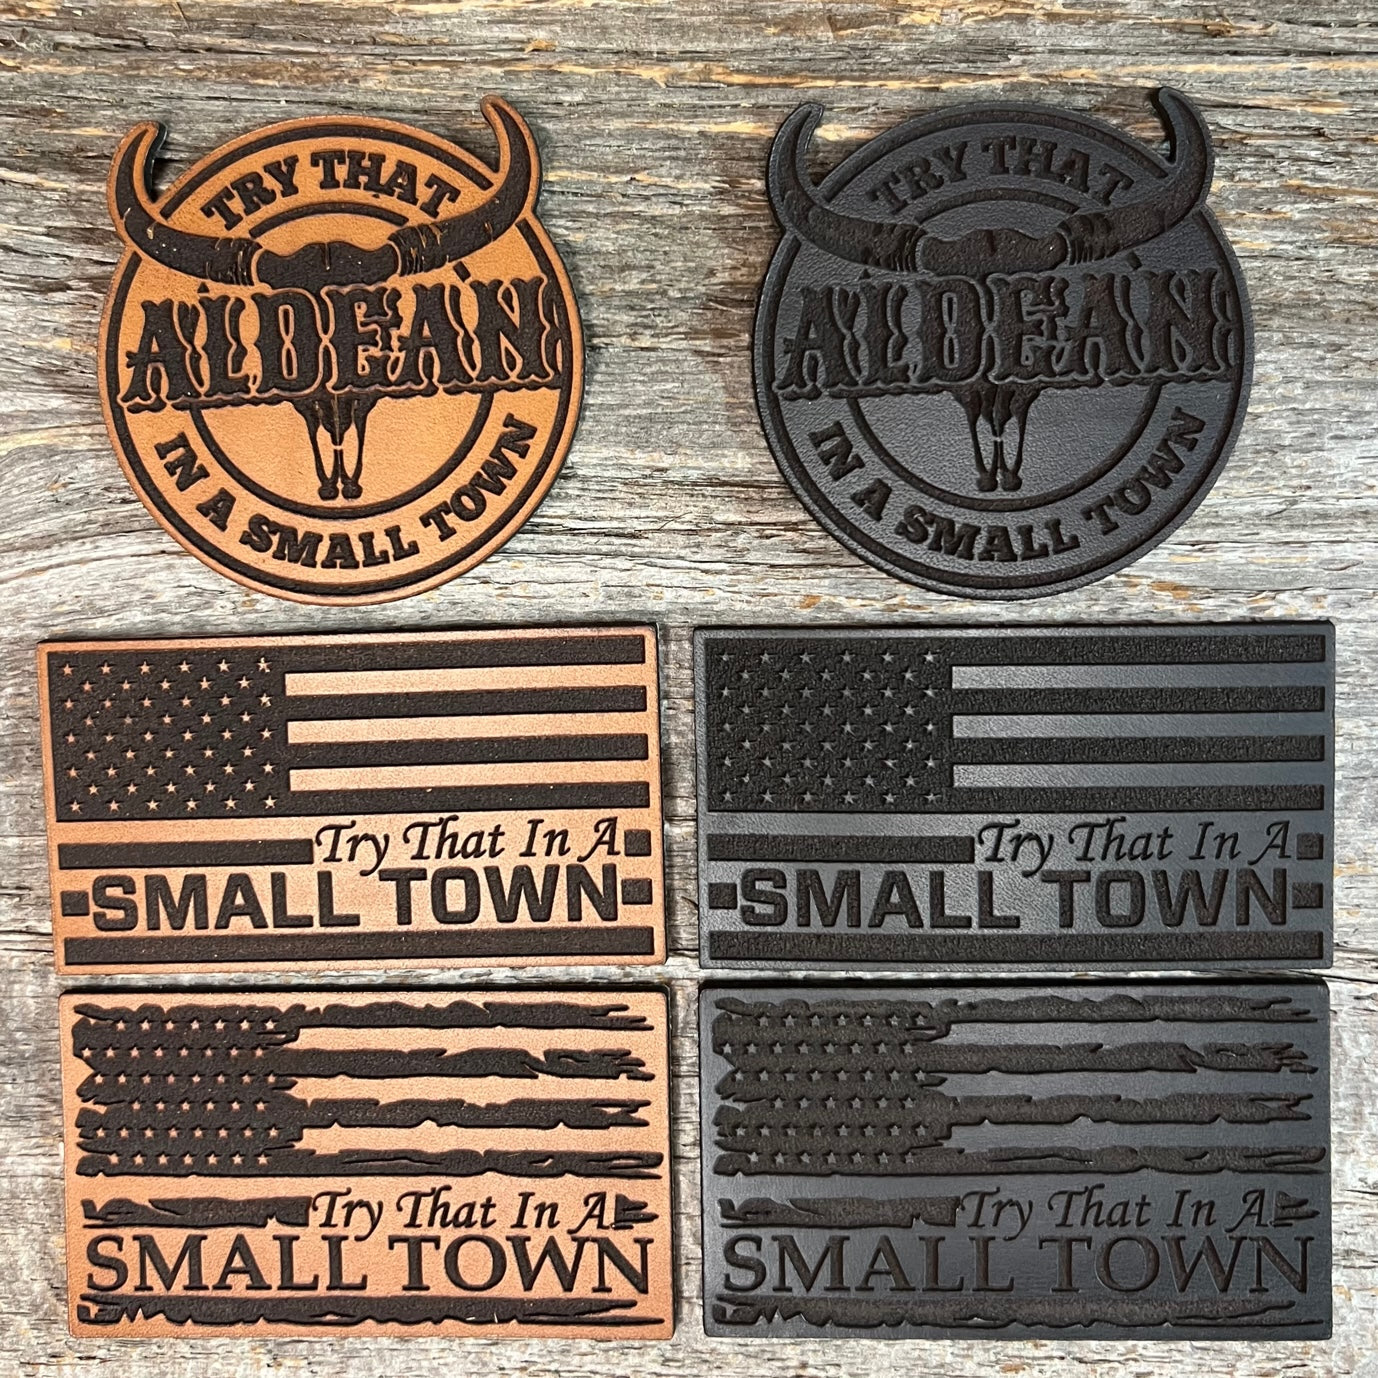 Try That In A Small Town - Aldean Patch